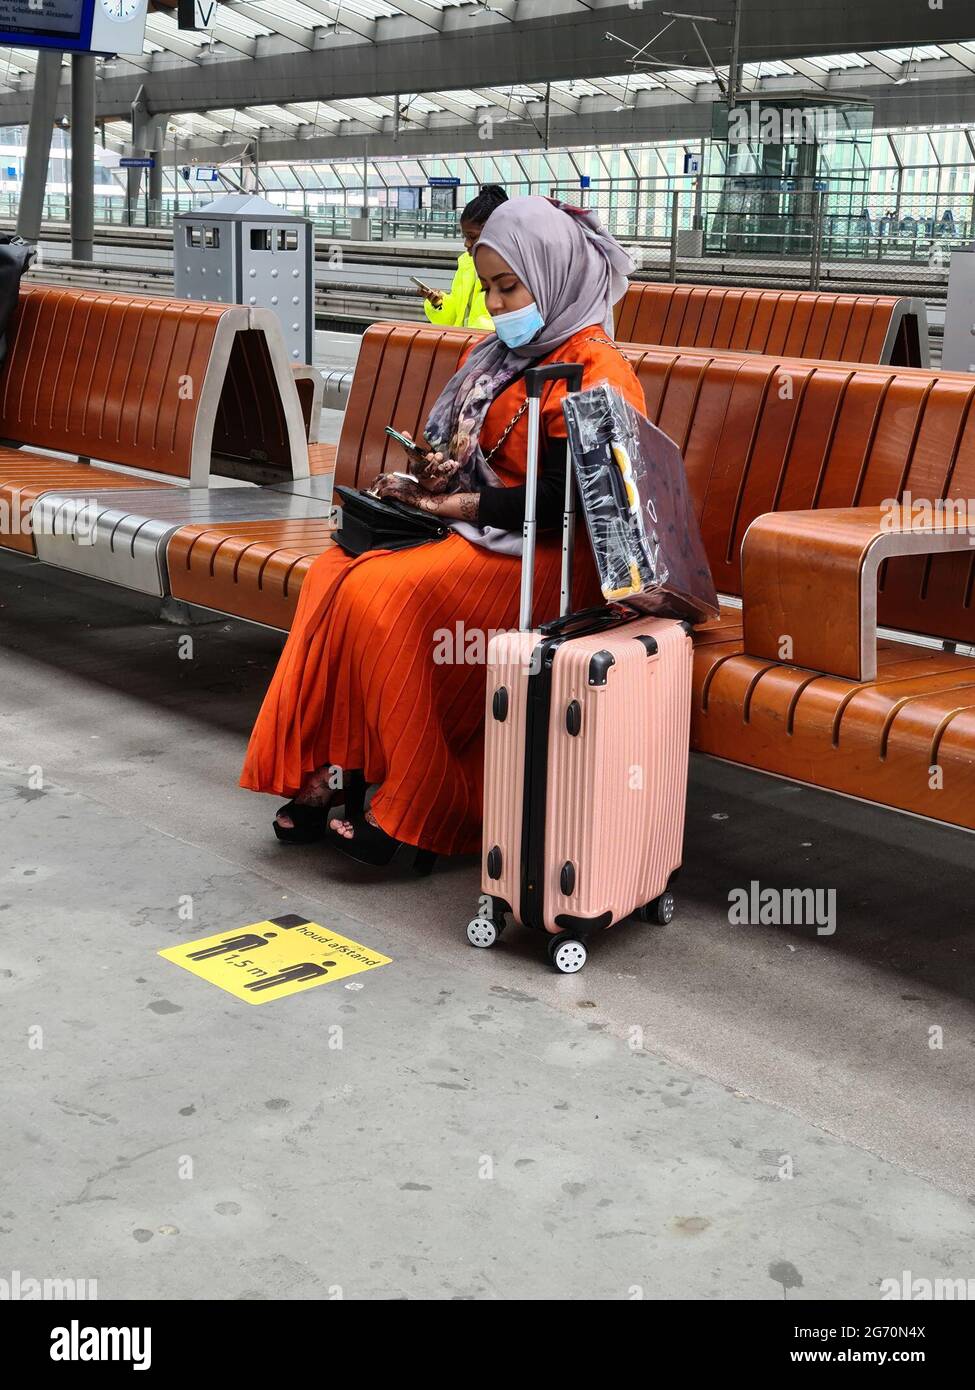 Amsterdam, Netherlands, 25th june 2021 : Lady in orange Moroccan dress wearing a scarf and mouth mask, sitting next to her luggage on a bench in the station hall of Amsterdam Bijlmer ArenA. On the ground just before her the 1,5m distance sign Stock Photo